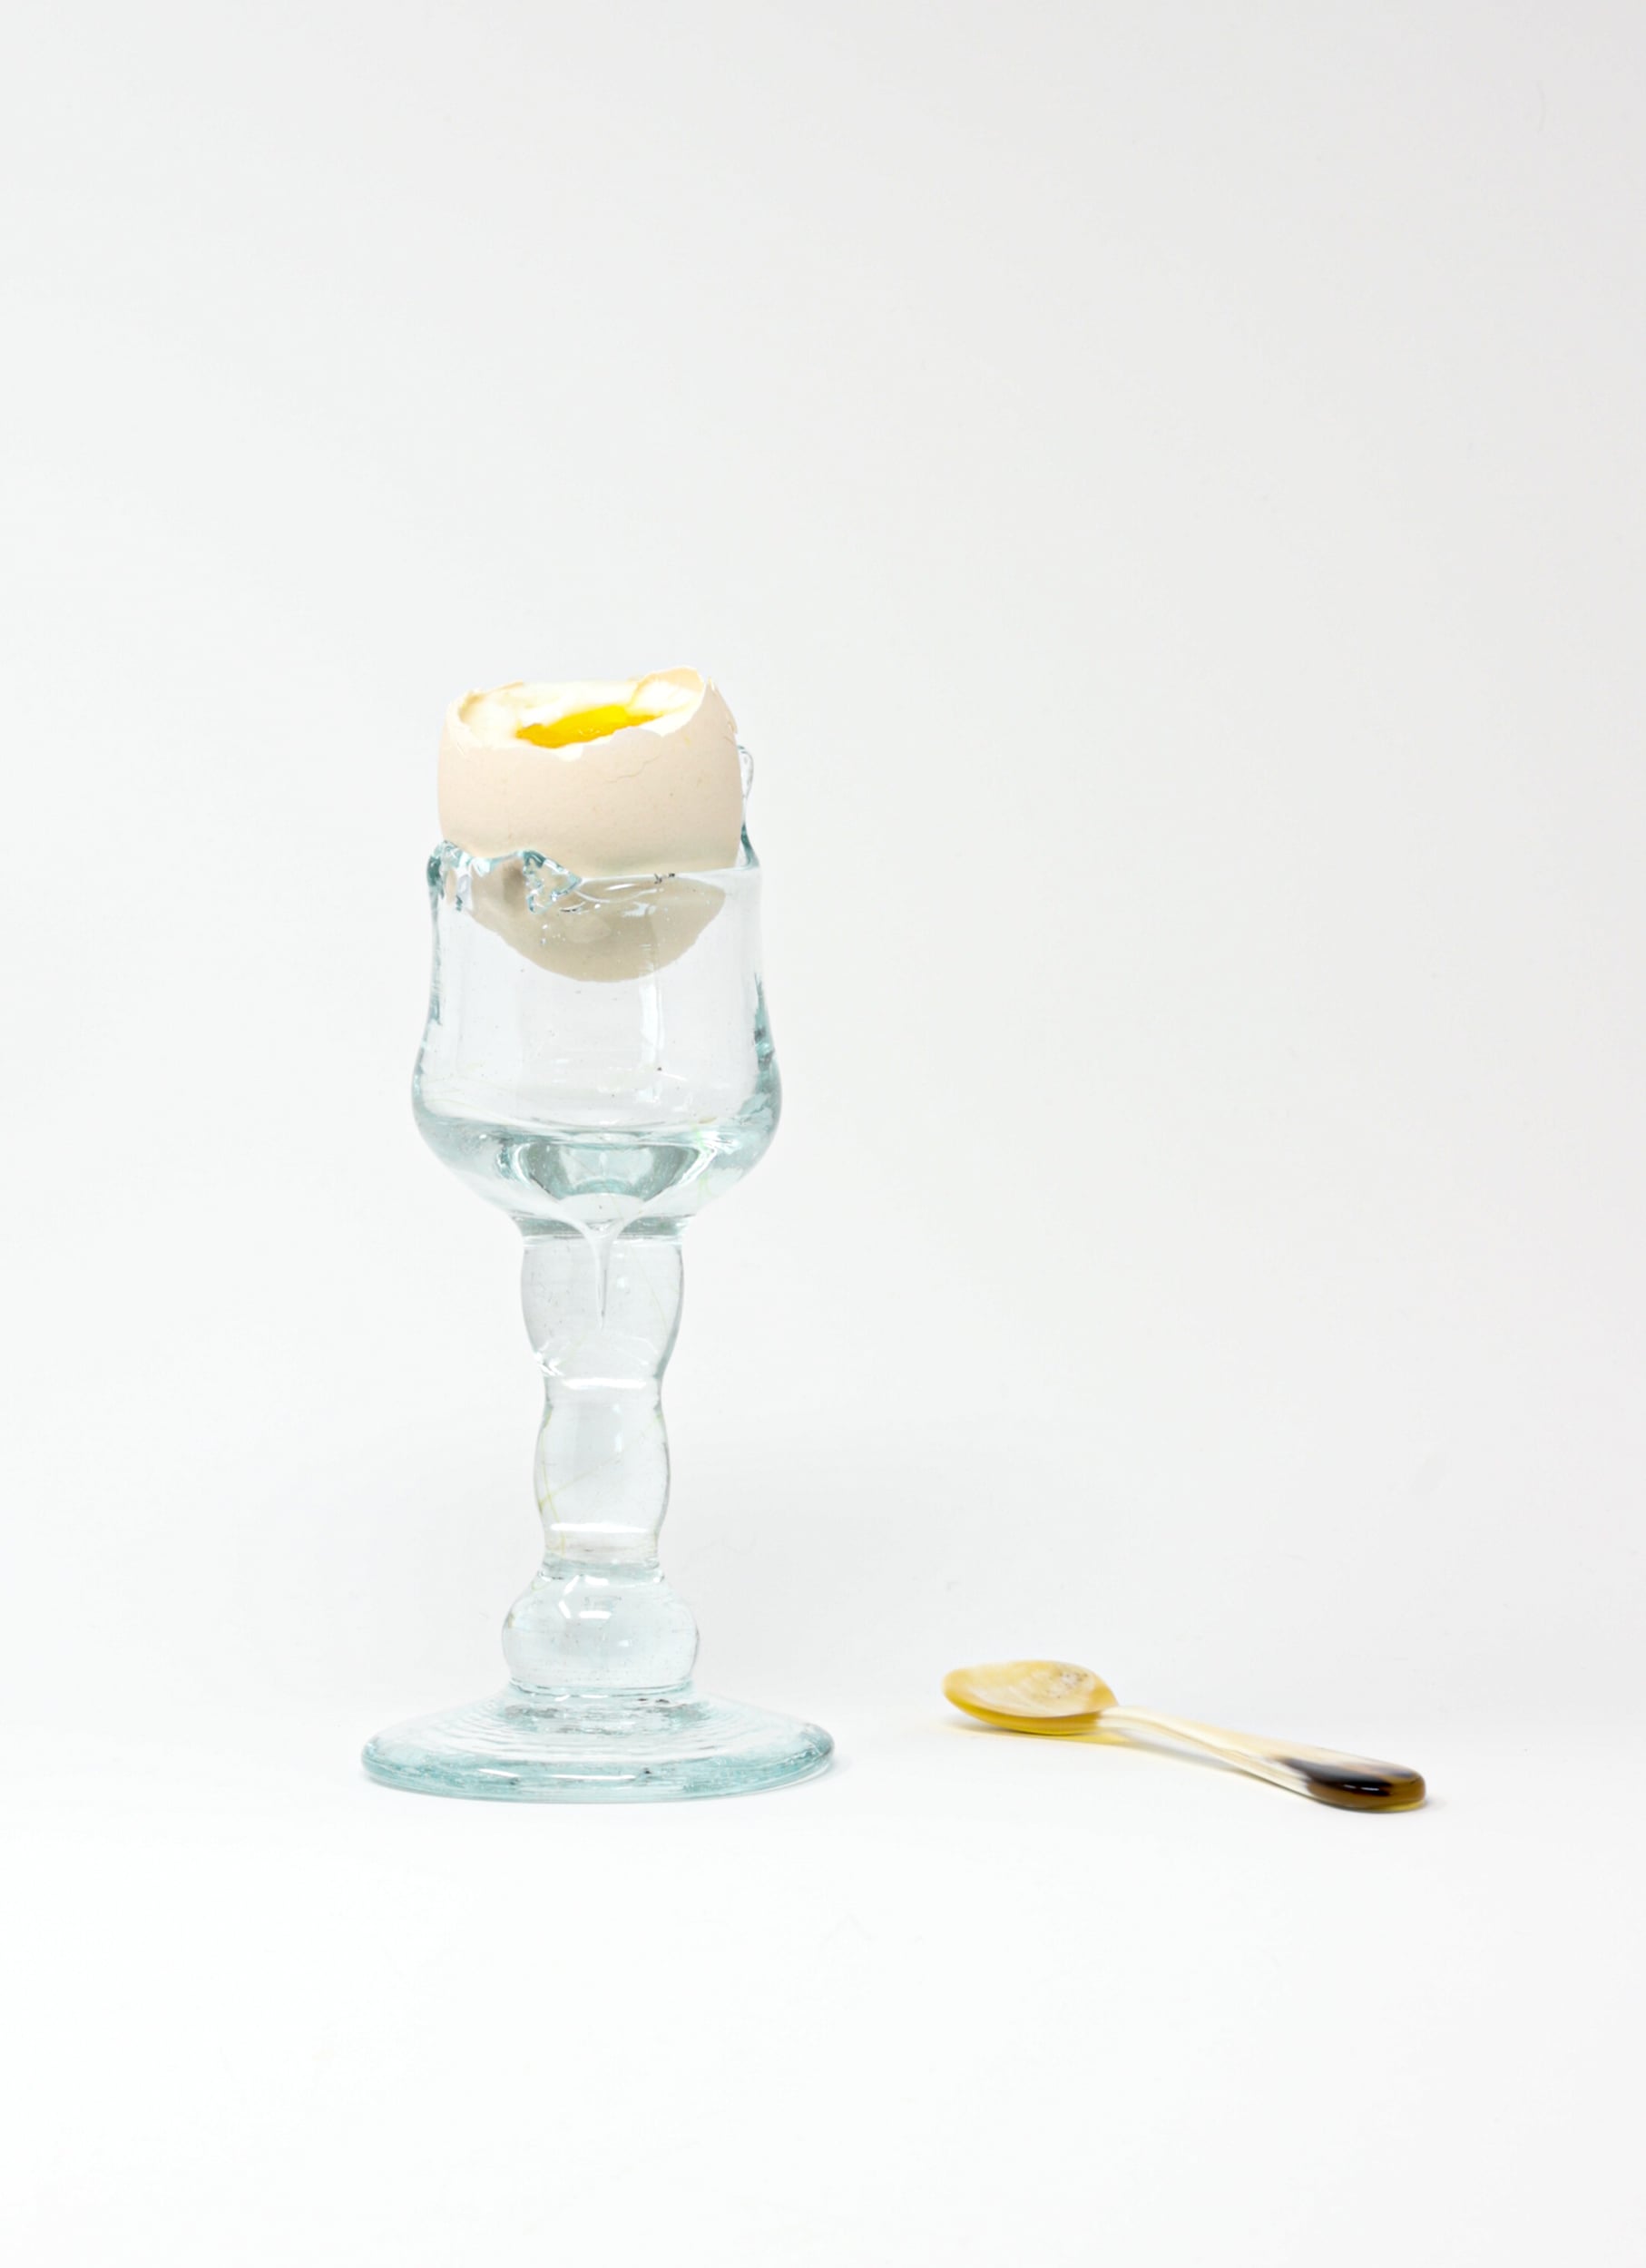 La Soufflerie - Hand-blown Incense Holder - Recycled Glass - Egg cup - Coctier